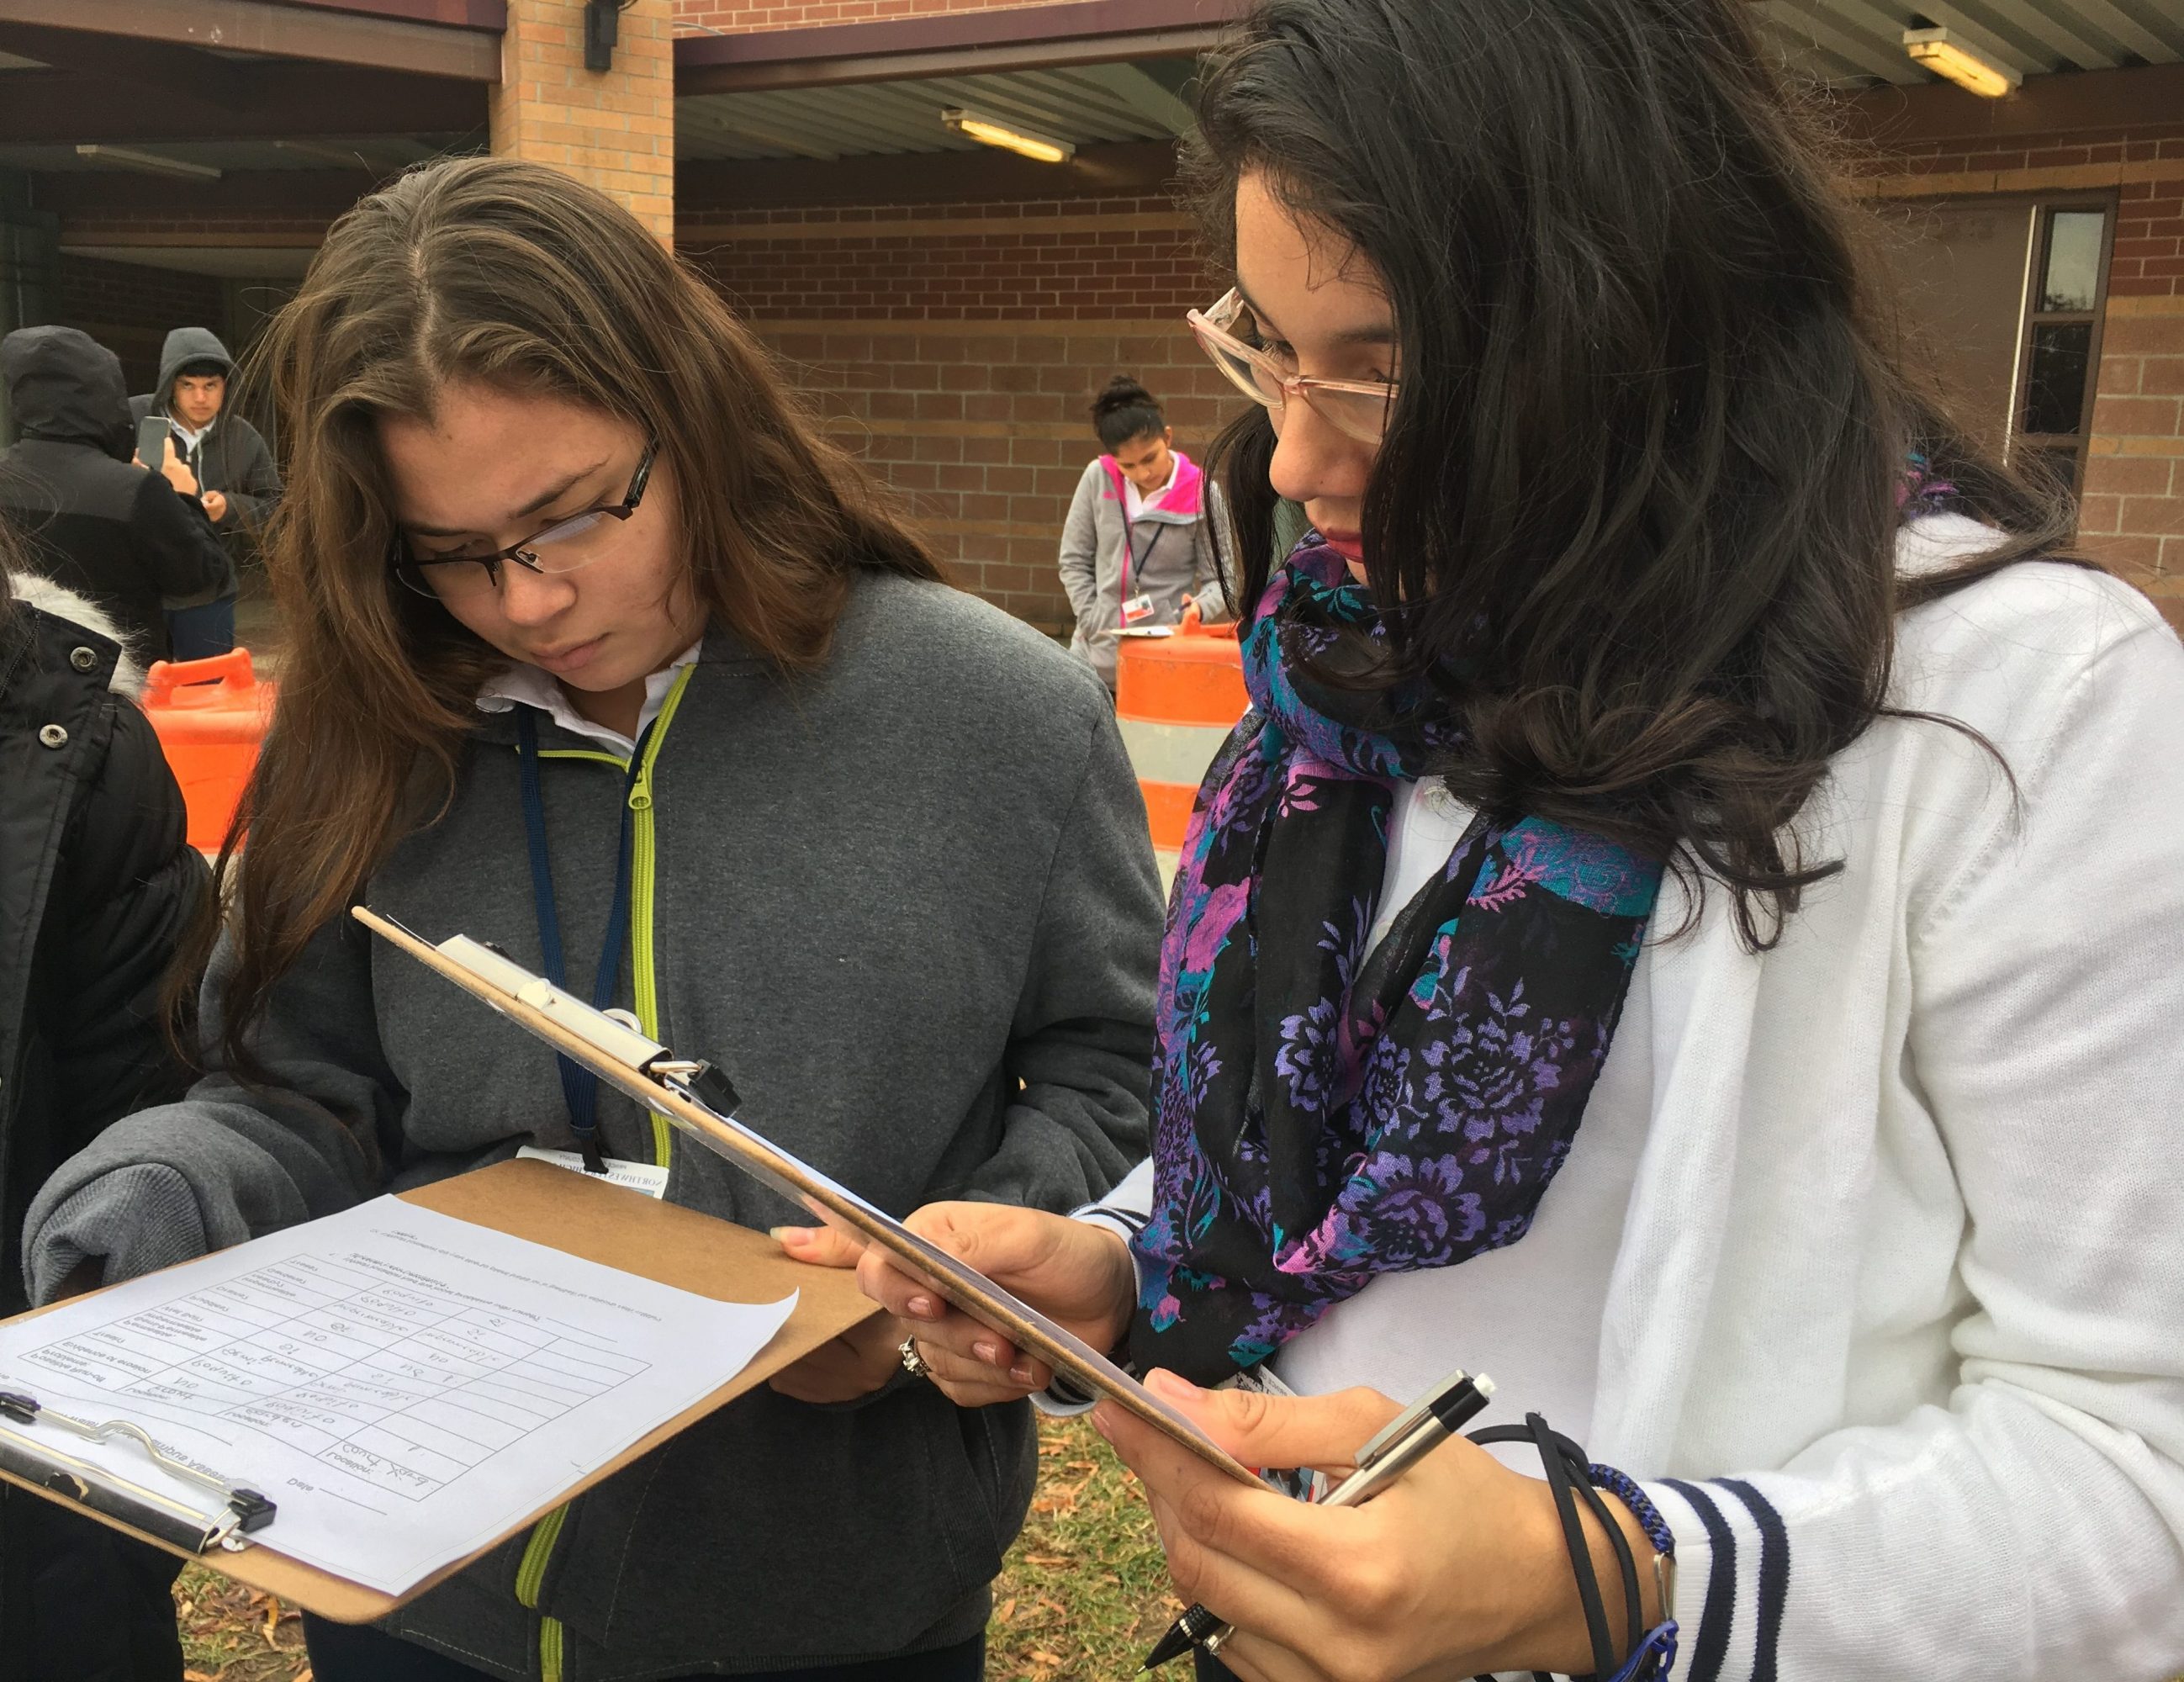 Two female high school students looking at clipboards.